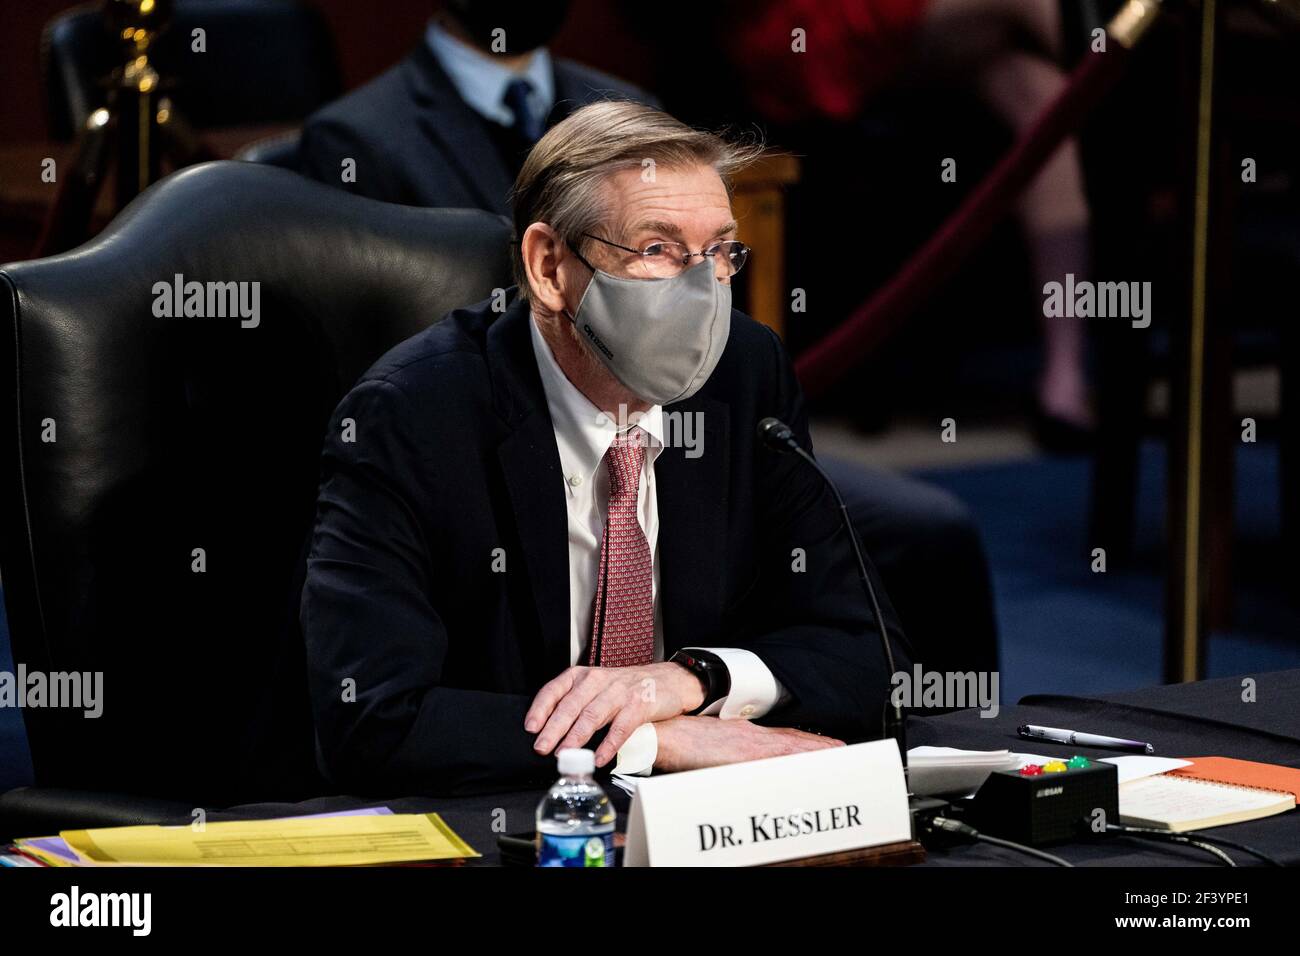 Washington, United States. 18th Mar, 2021. Dr. David Kessler, Chief Science Officer of the White House COVID-19 Response Team, listens at a hearing with the Senate Committee on Health, Education, Labor, and Pensions on the Covid-19 response on Capitol Hill in Washington March 18th, 2021. Pool Photo by Anna Moneymaker Credit: UPI/Alamy Live News Stock Photo